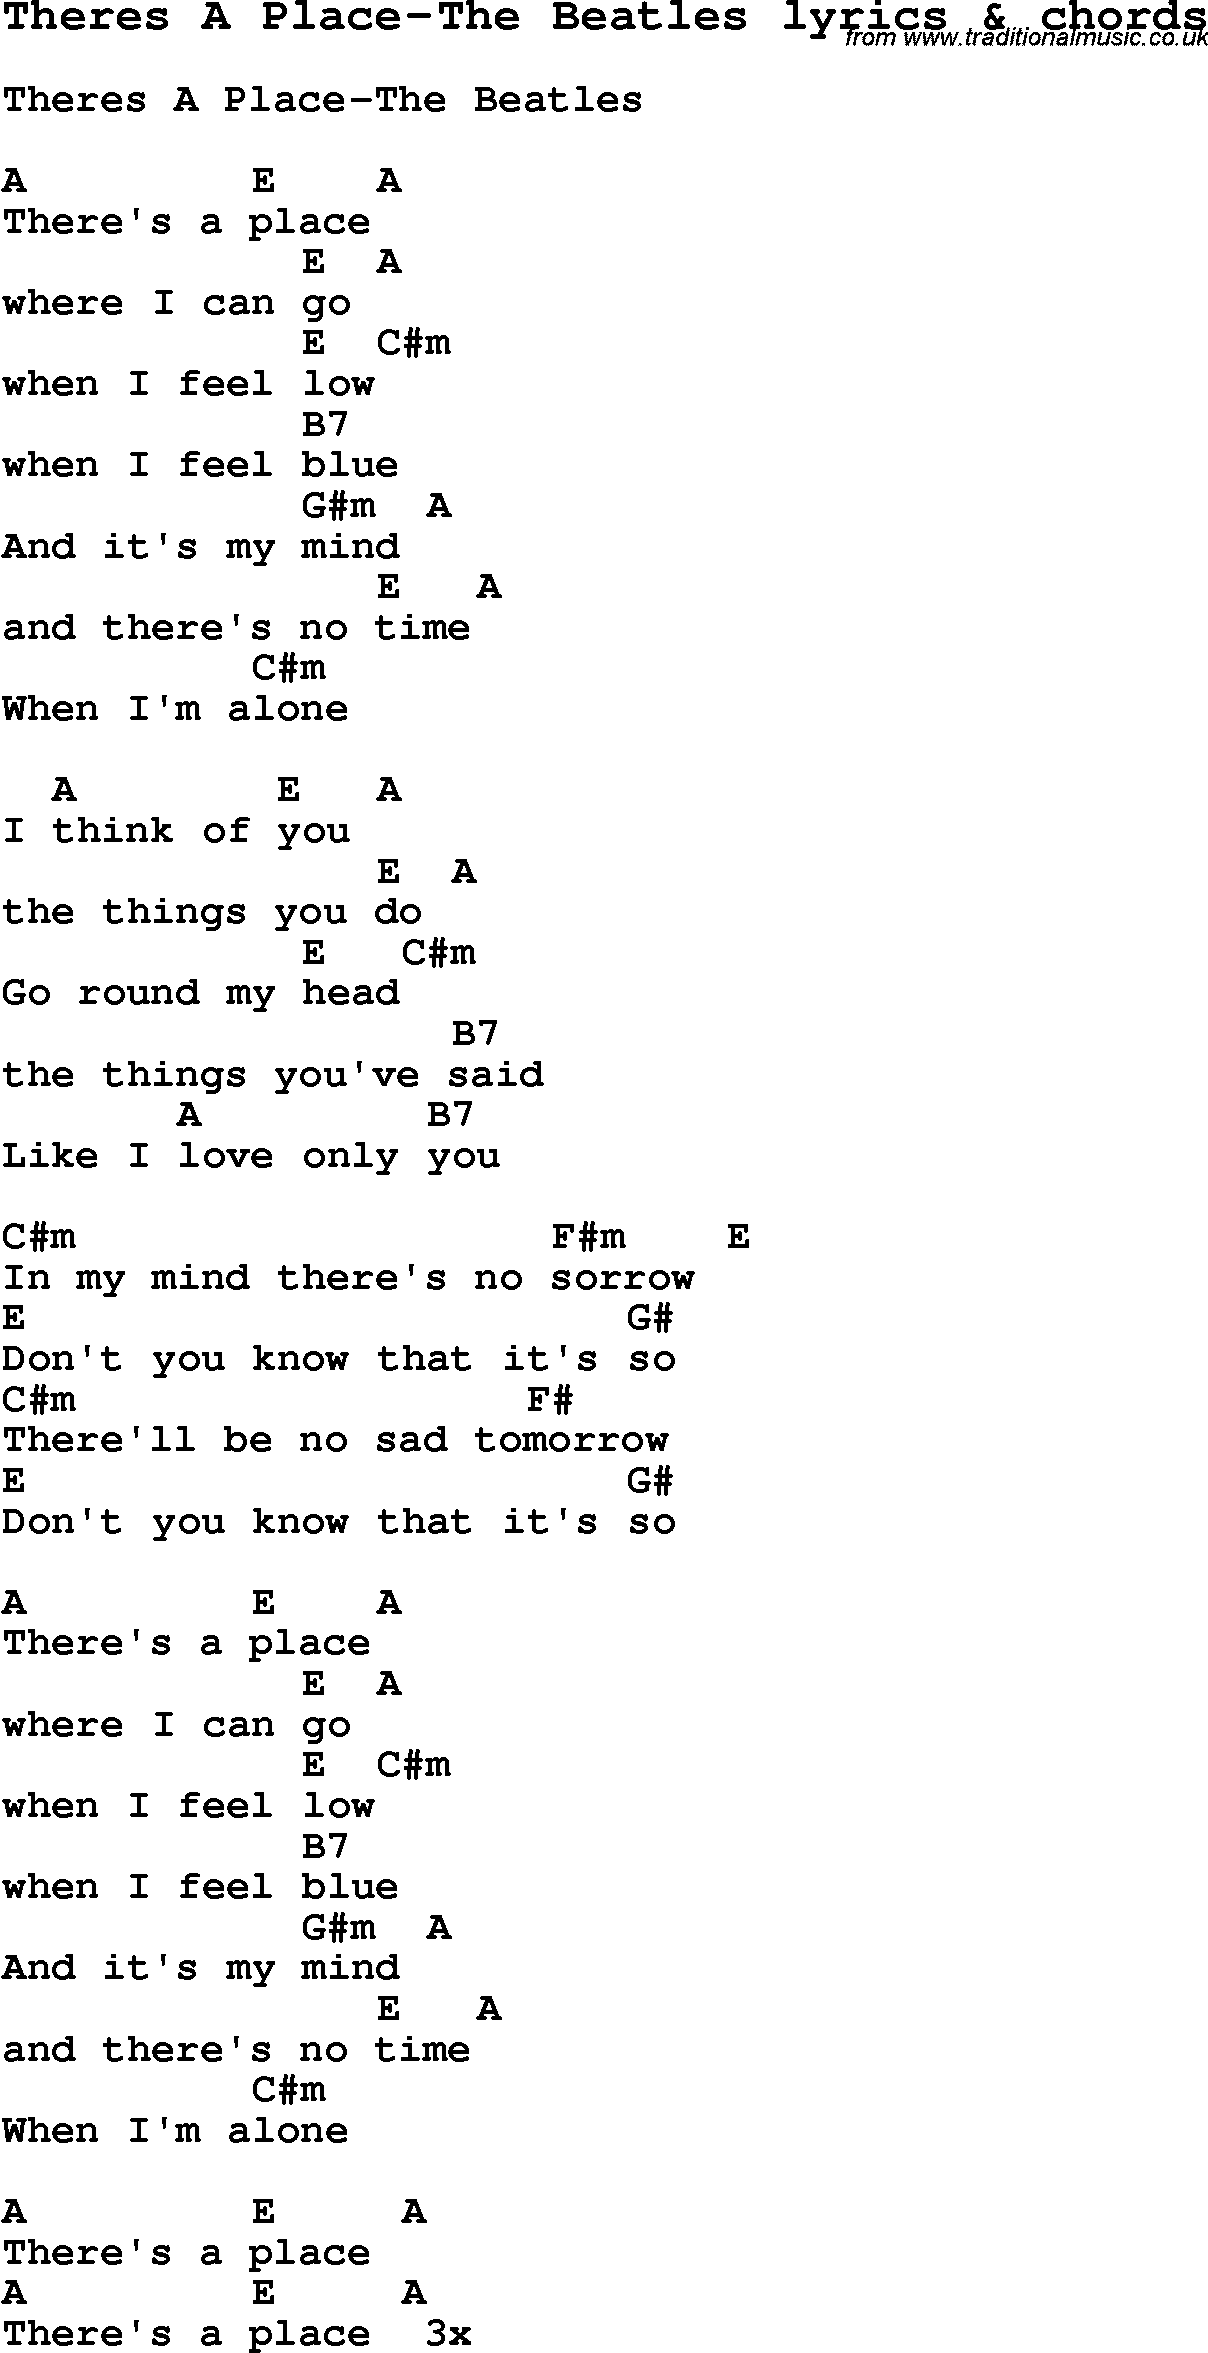 Love Song Lyrics for: Theres A Place-The Beatles with chords for Ukulele, Guitar Banjo etc.